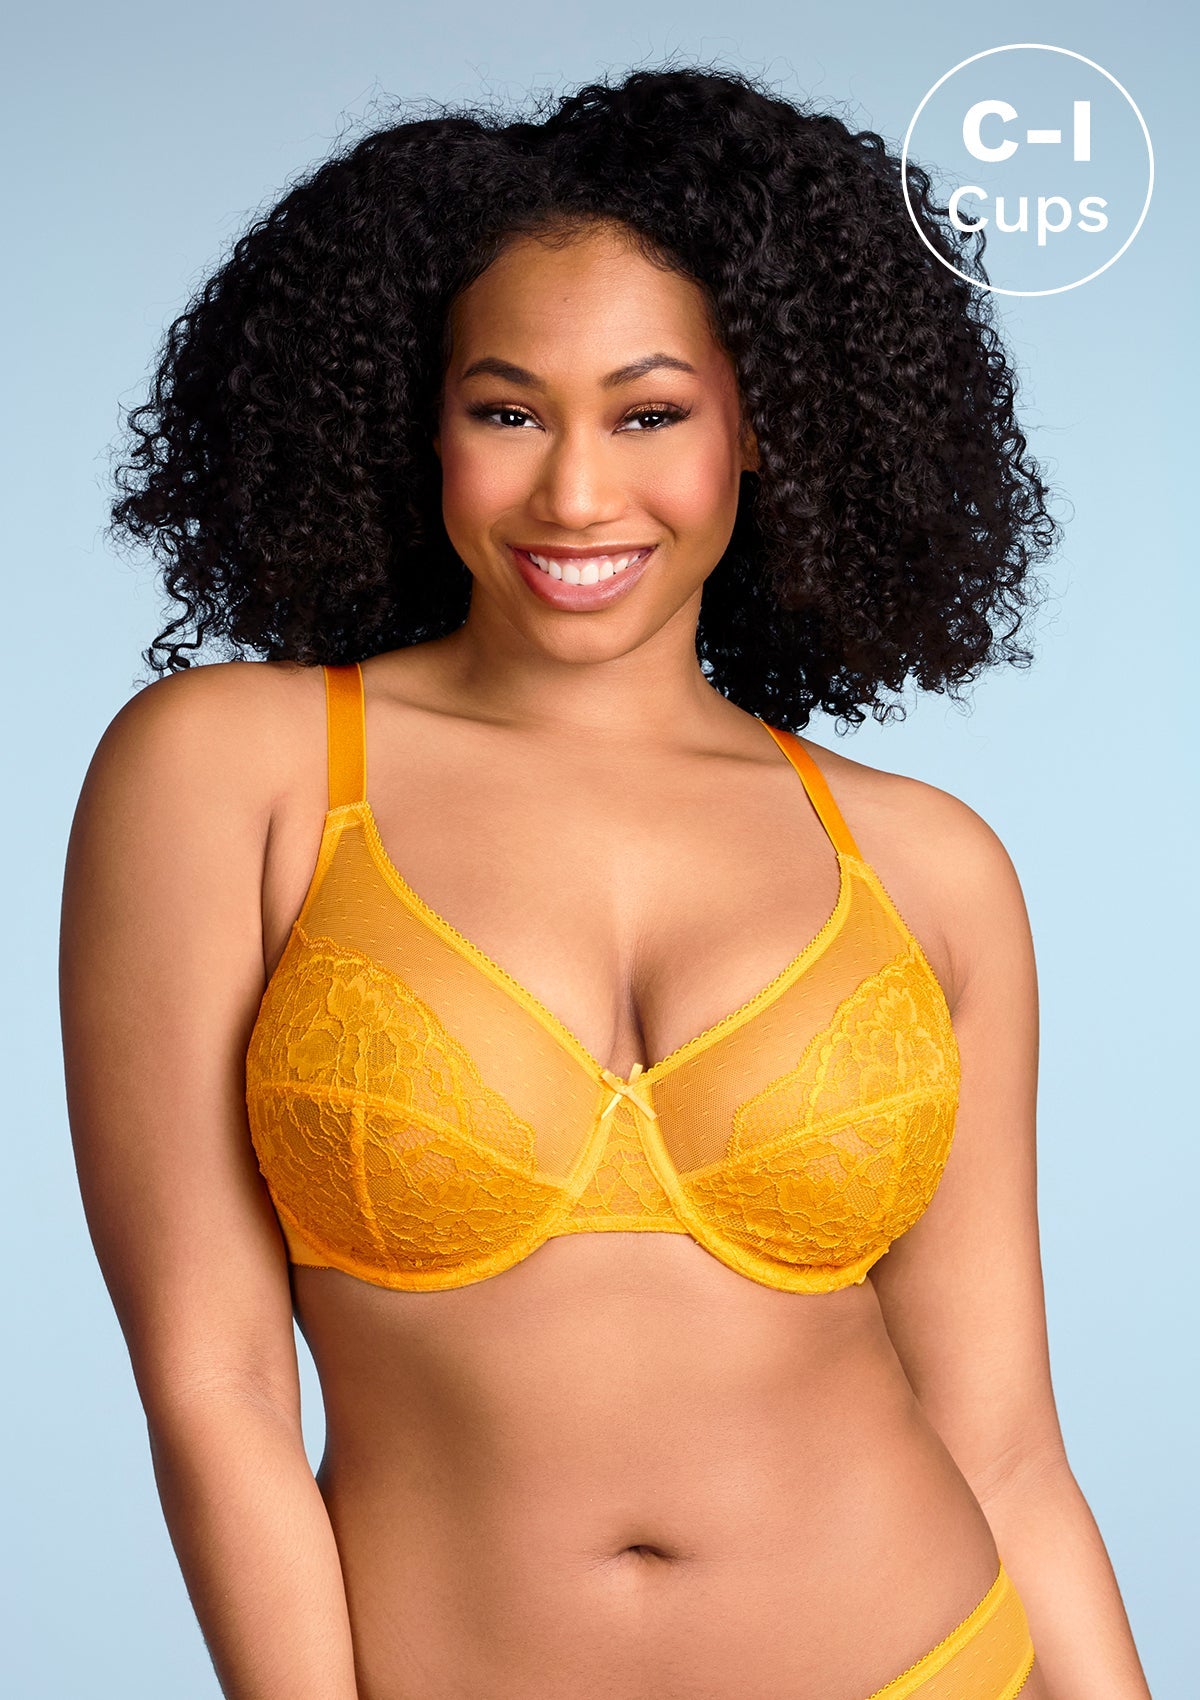 HSIA Enchante Bra And Panty Sets: Unpadded Bra With Back Support - Cadmium Yellow / 34 / G